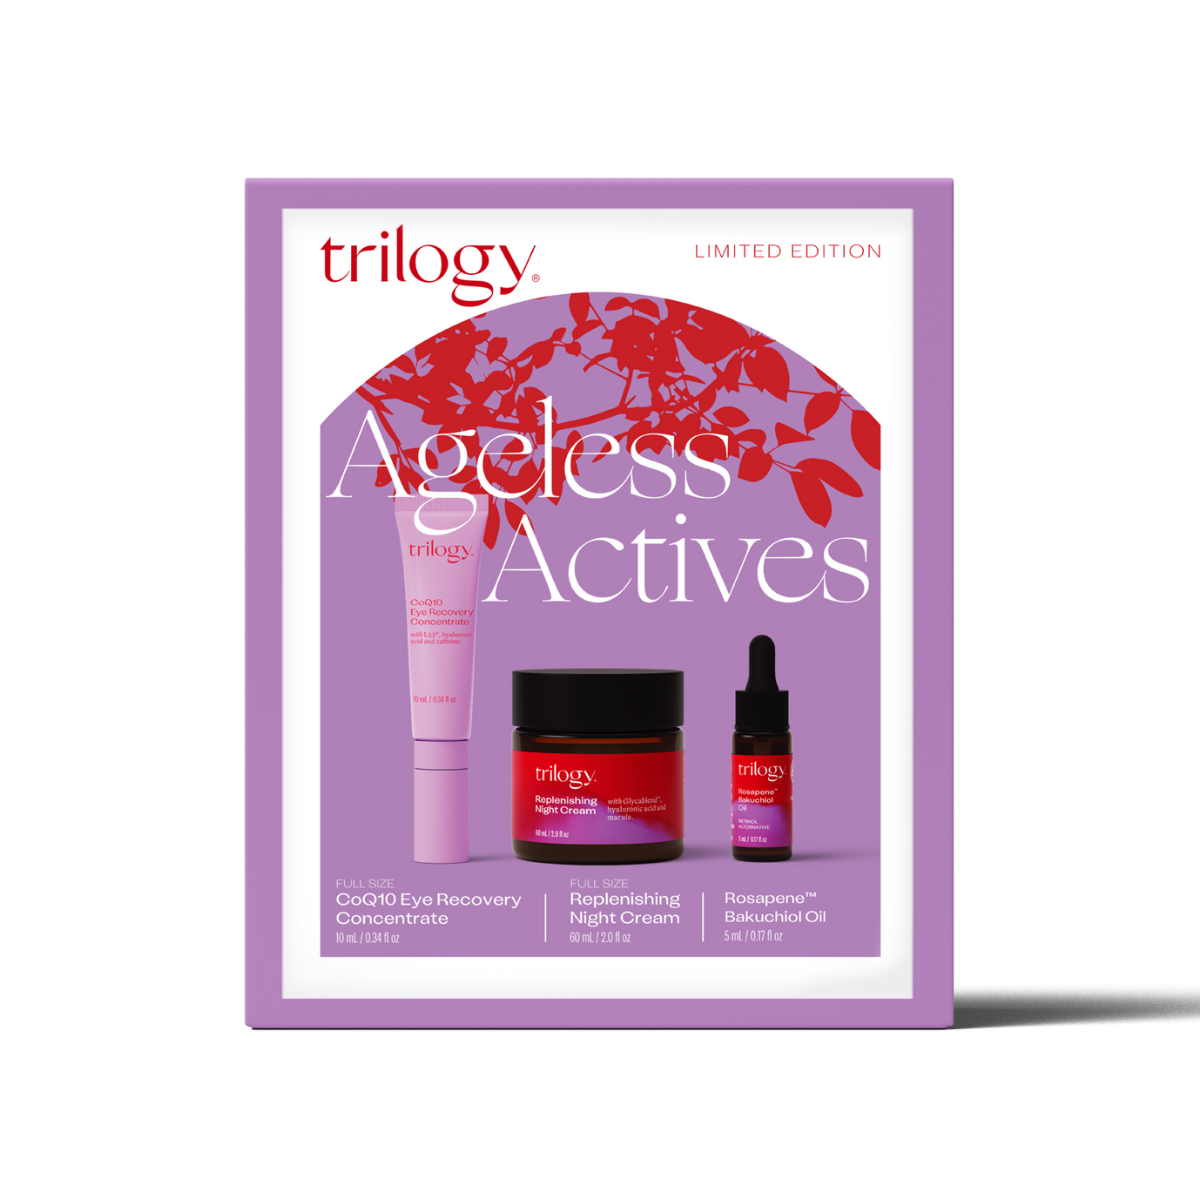 Trilogy Ageless Actives Gift Set SAVE 67%